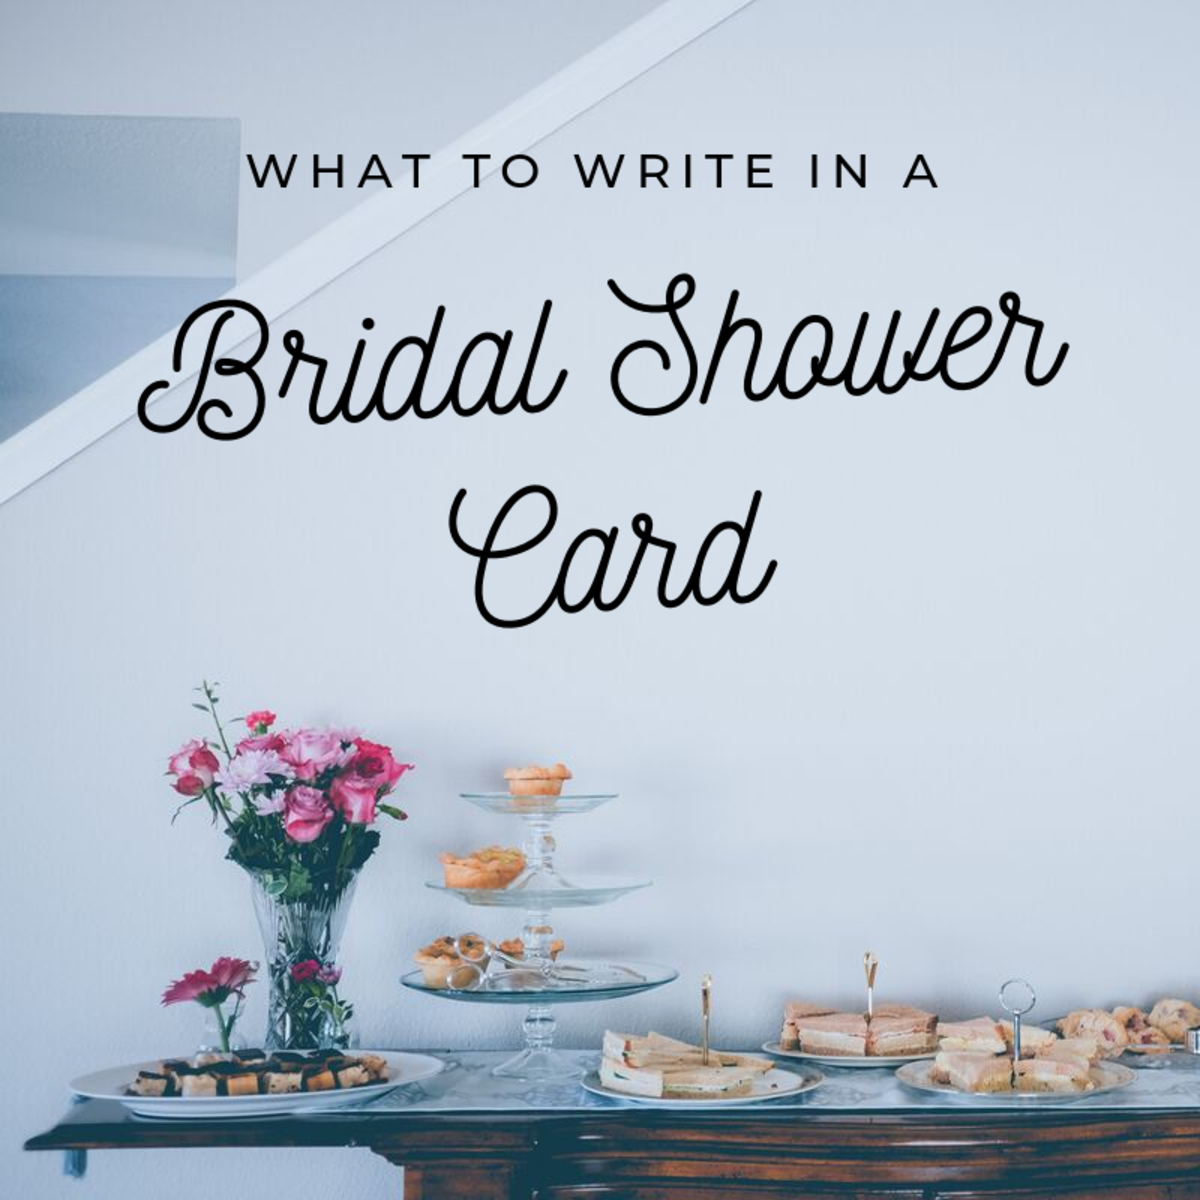 Example Bridal Shower Card Messages | Holidappy